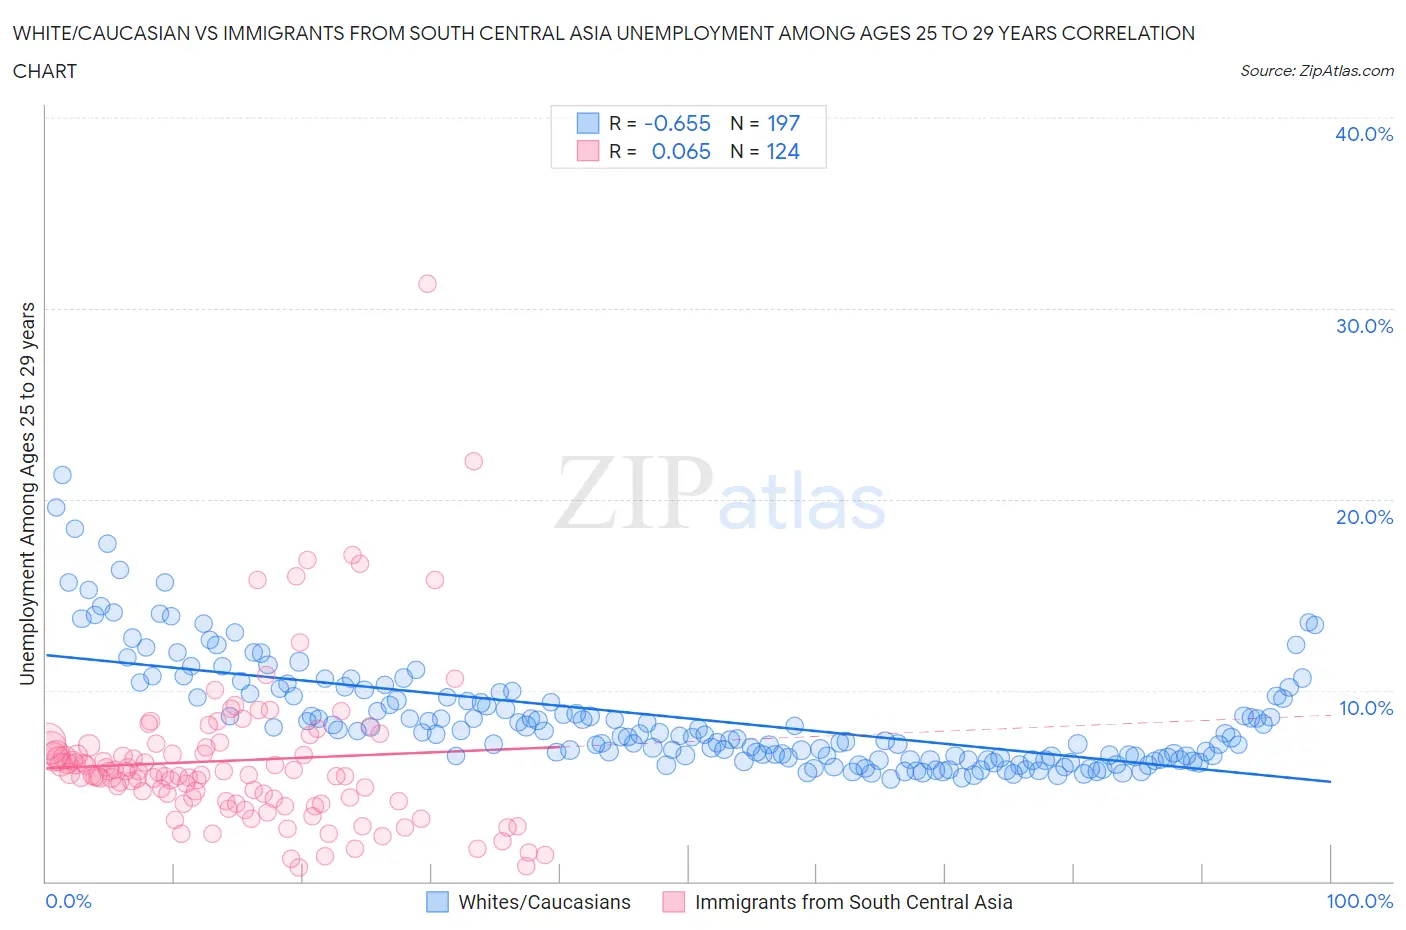 White/Caucasian vs Immigrants from South Central Asia Unemployment Among Ages 25 to 29 years